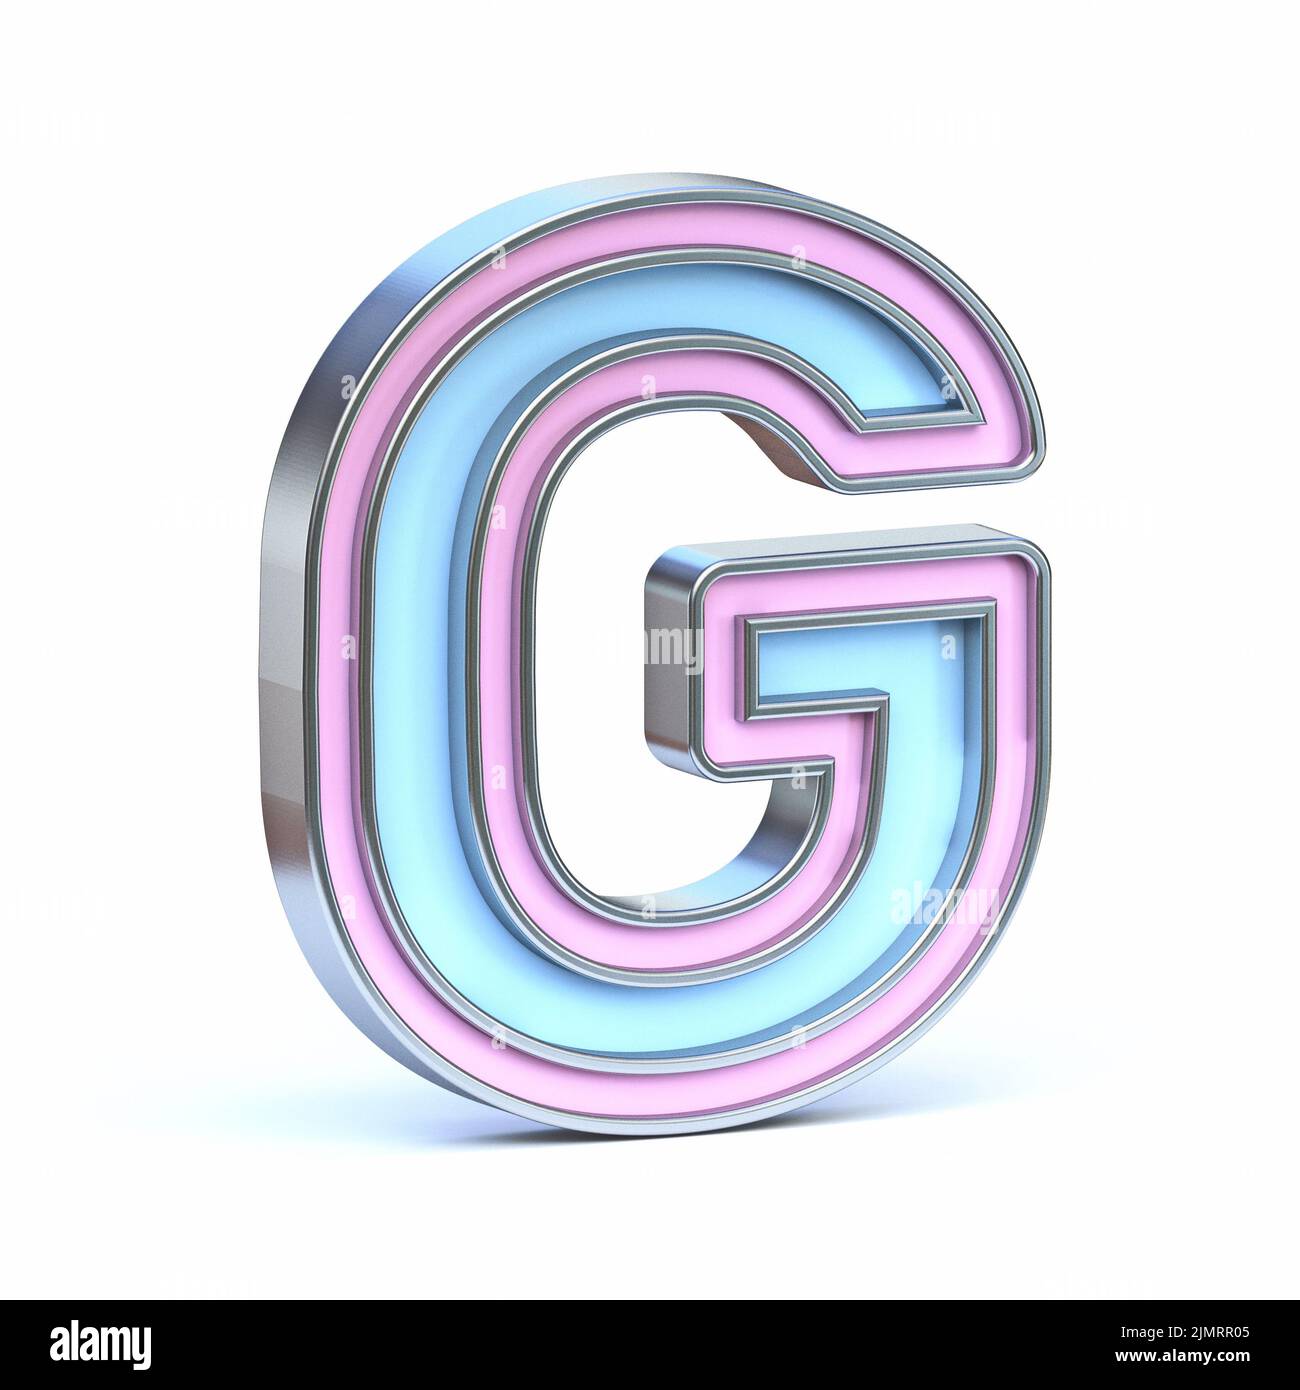 Blue and pink metal font Letter G 3D Stock Photo